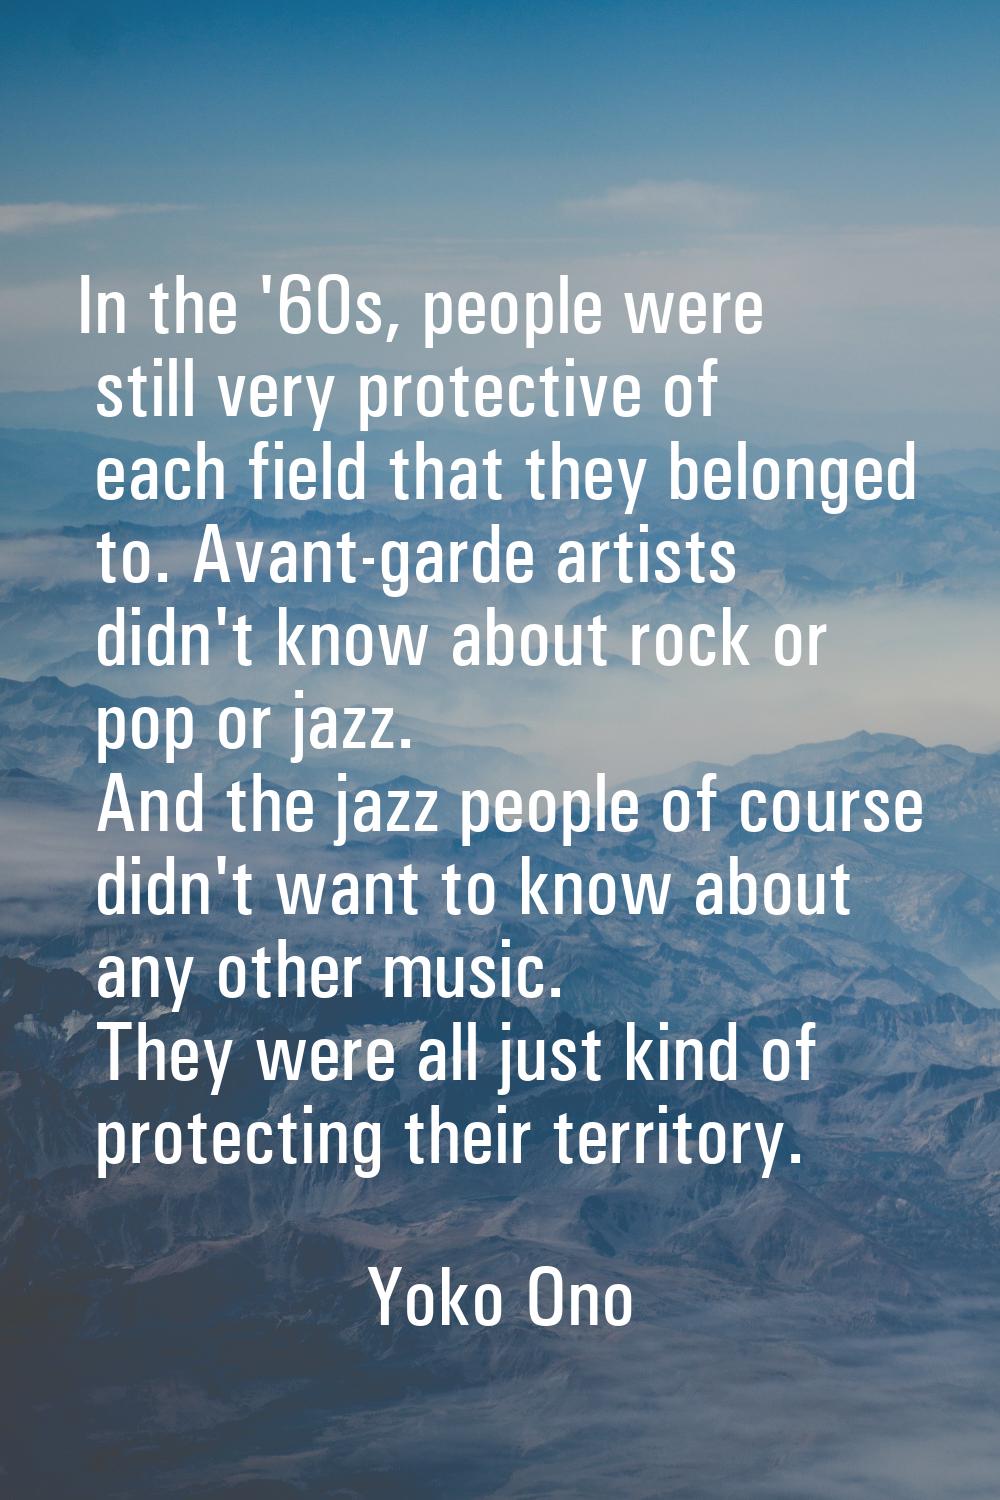 In the '60s, people were still very protective of each field that they belonged to. Avant-garde art